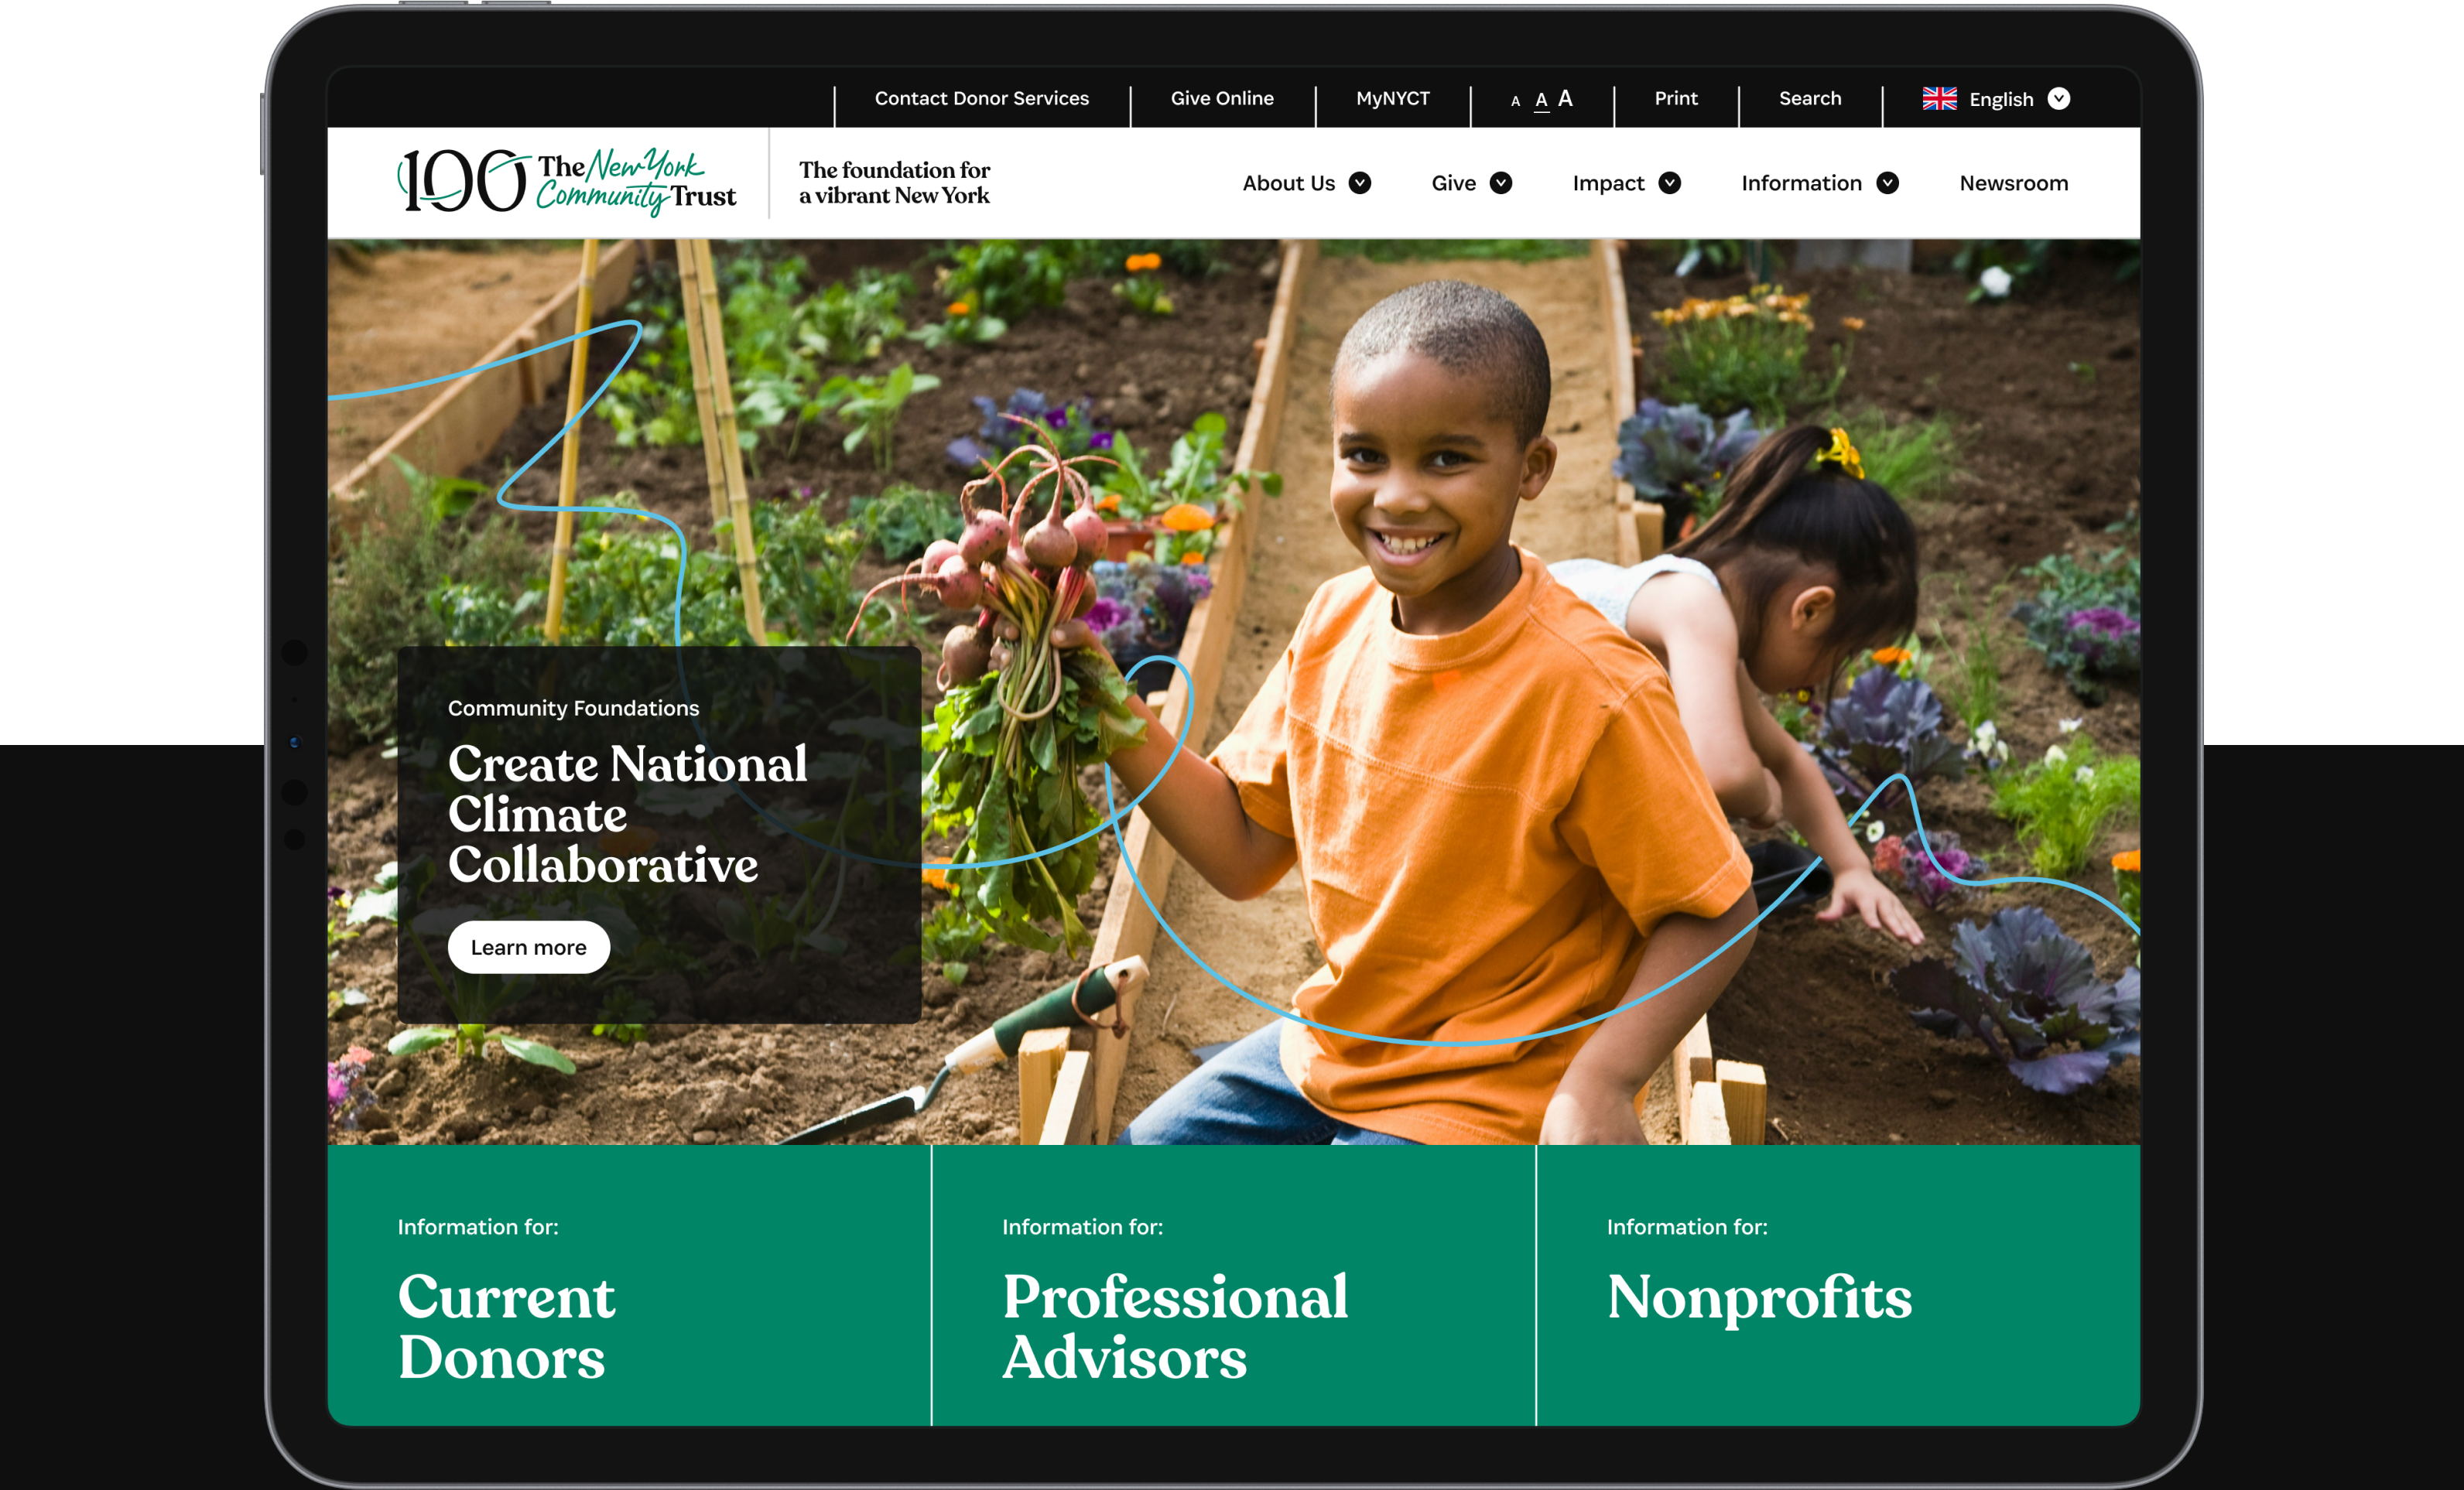 A screenshot of The New York Community Trust website showcasing children gardening. The screen features a header with the foundation's name and menu options. The main content highlights an initiative called "Create National Climate Collaborative" with buttons for more information.